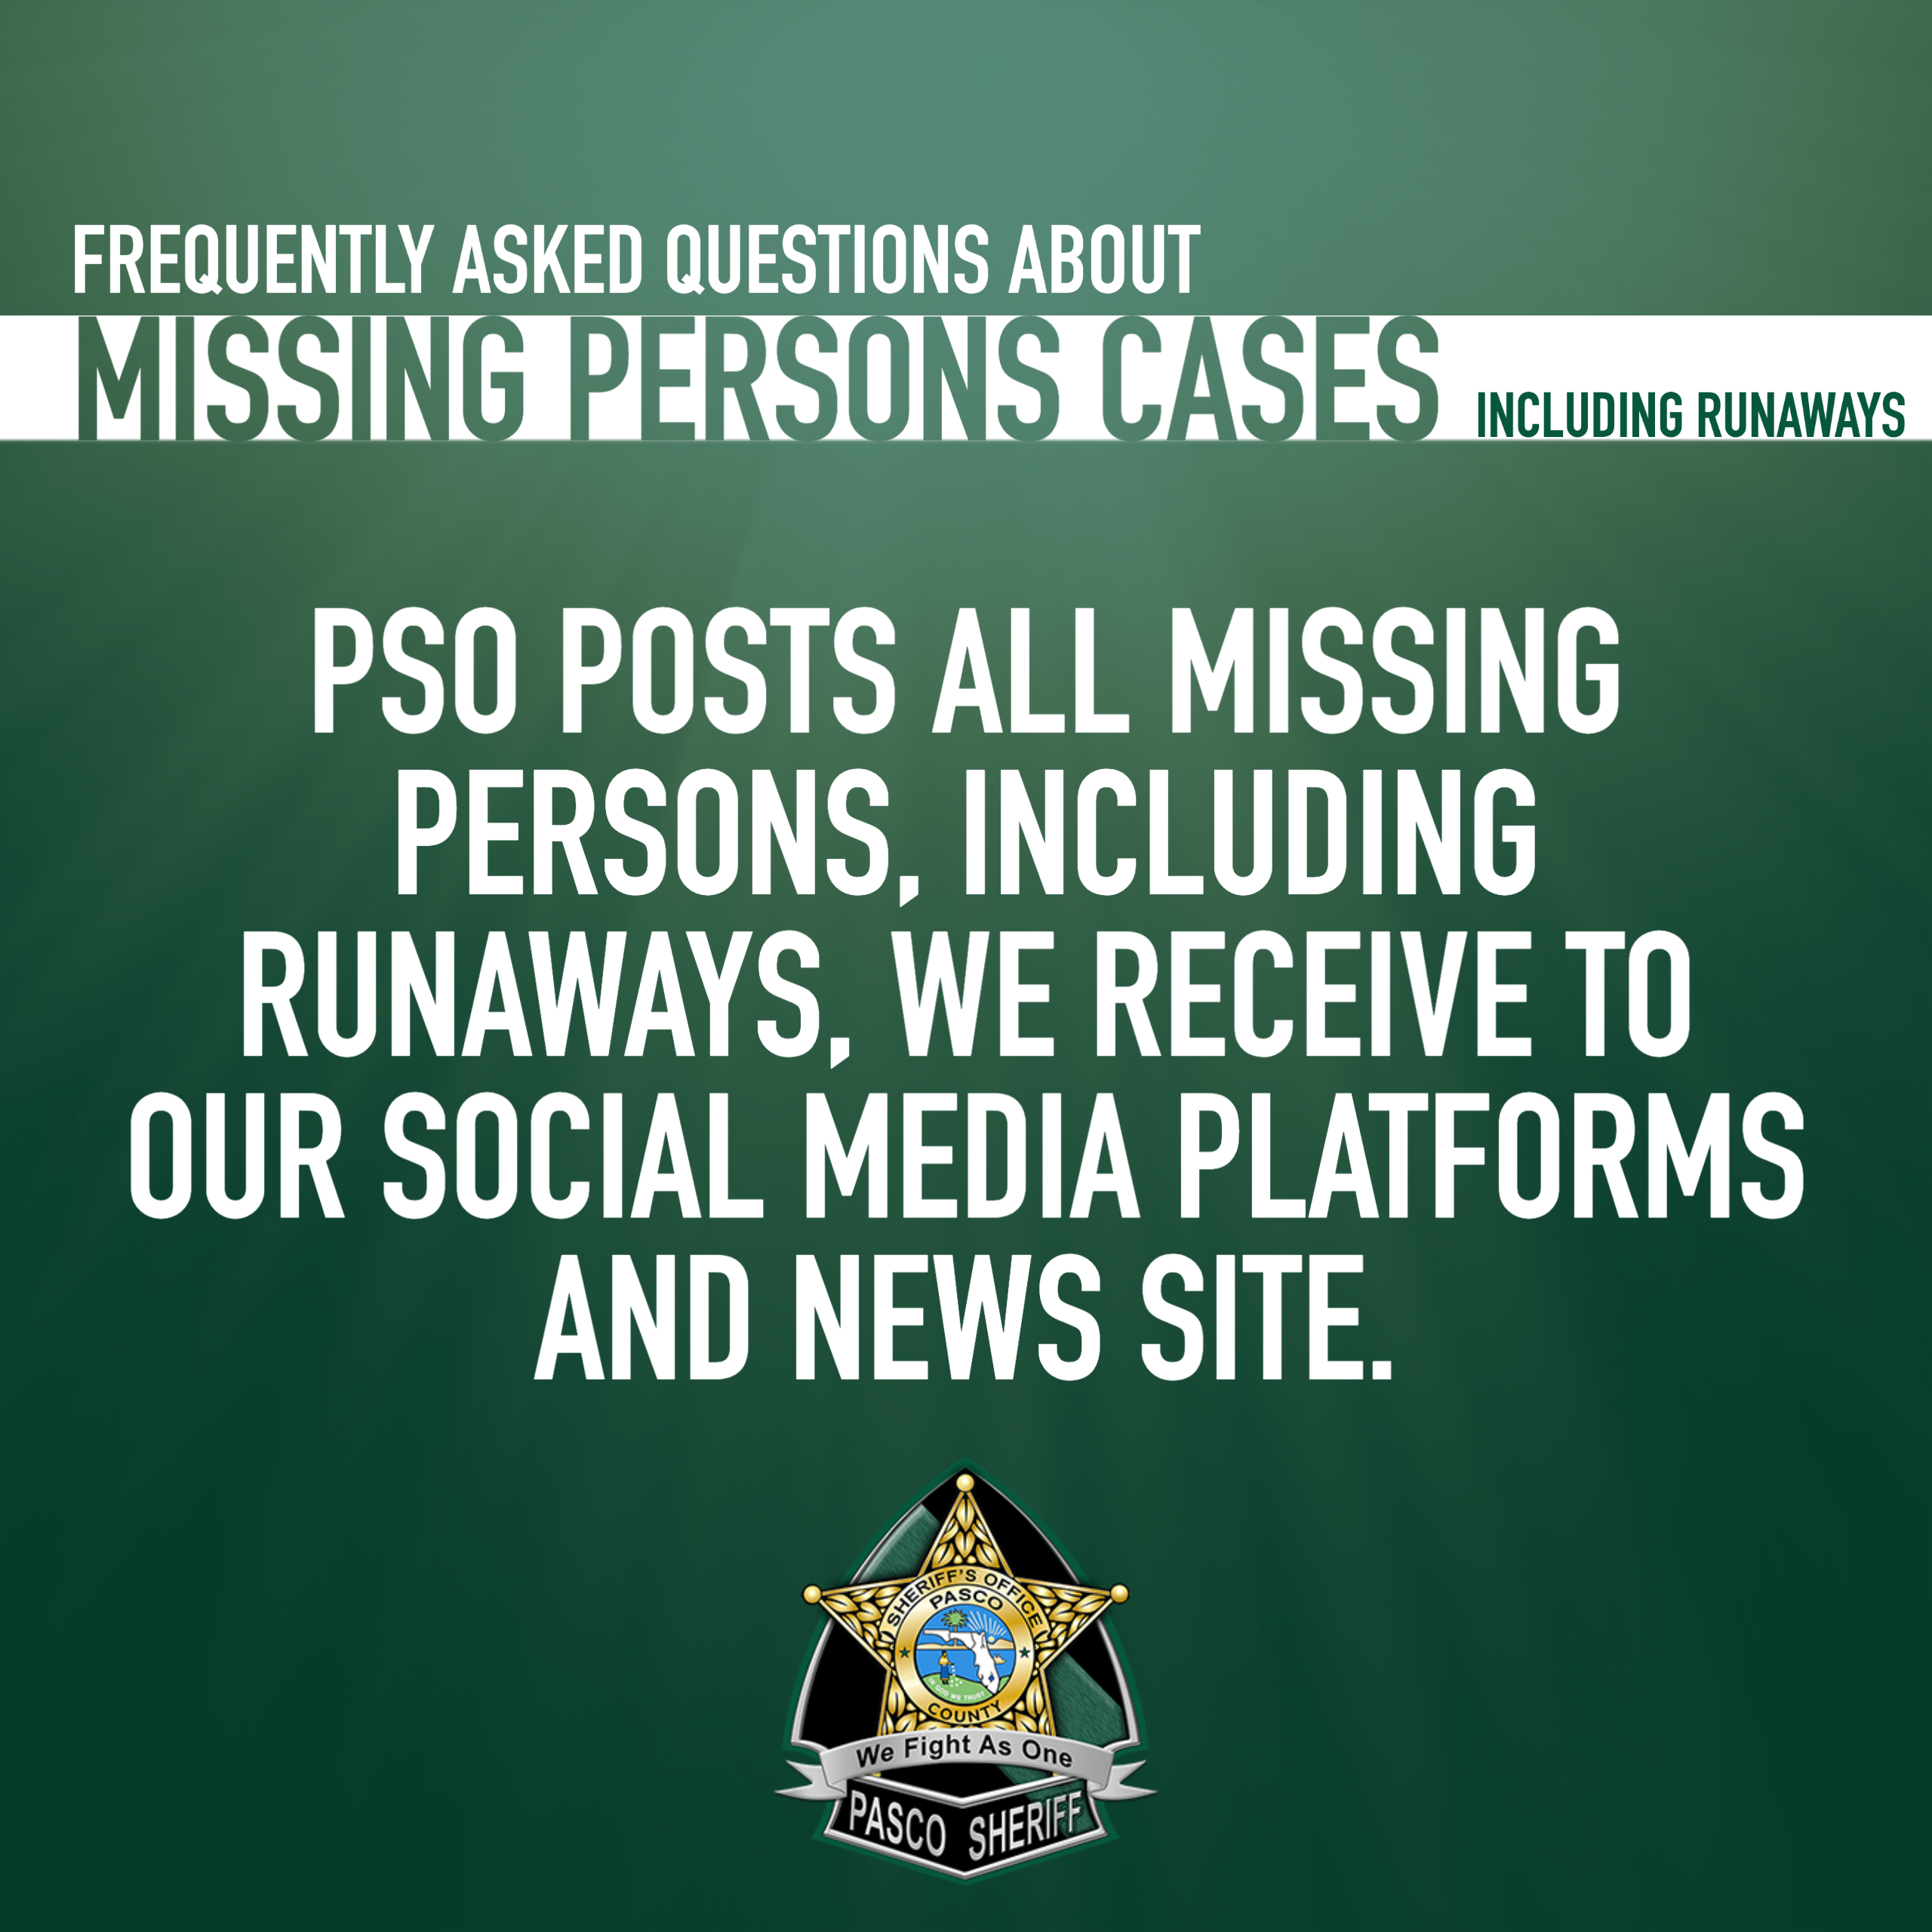 MISSING PERSONS